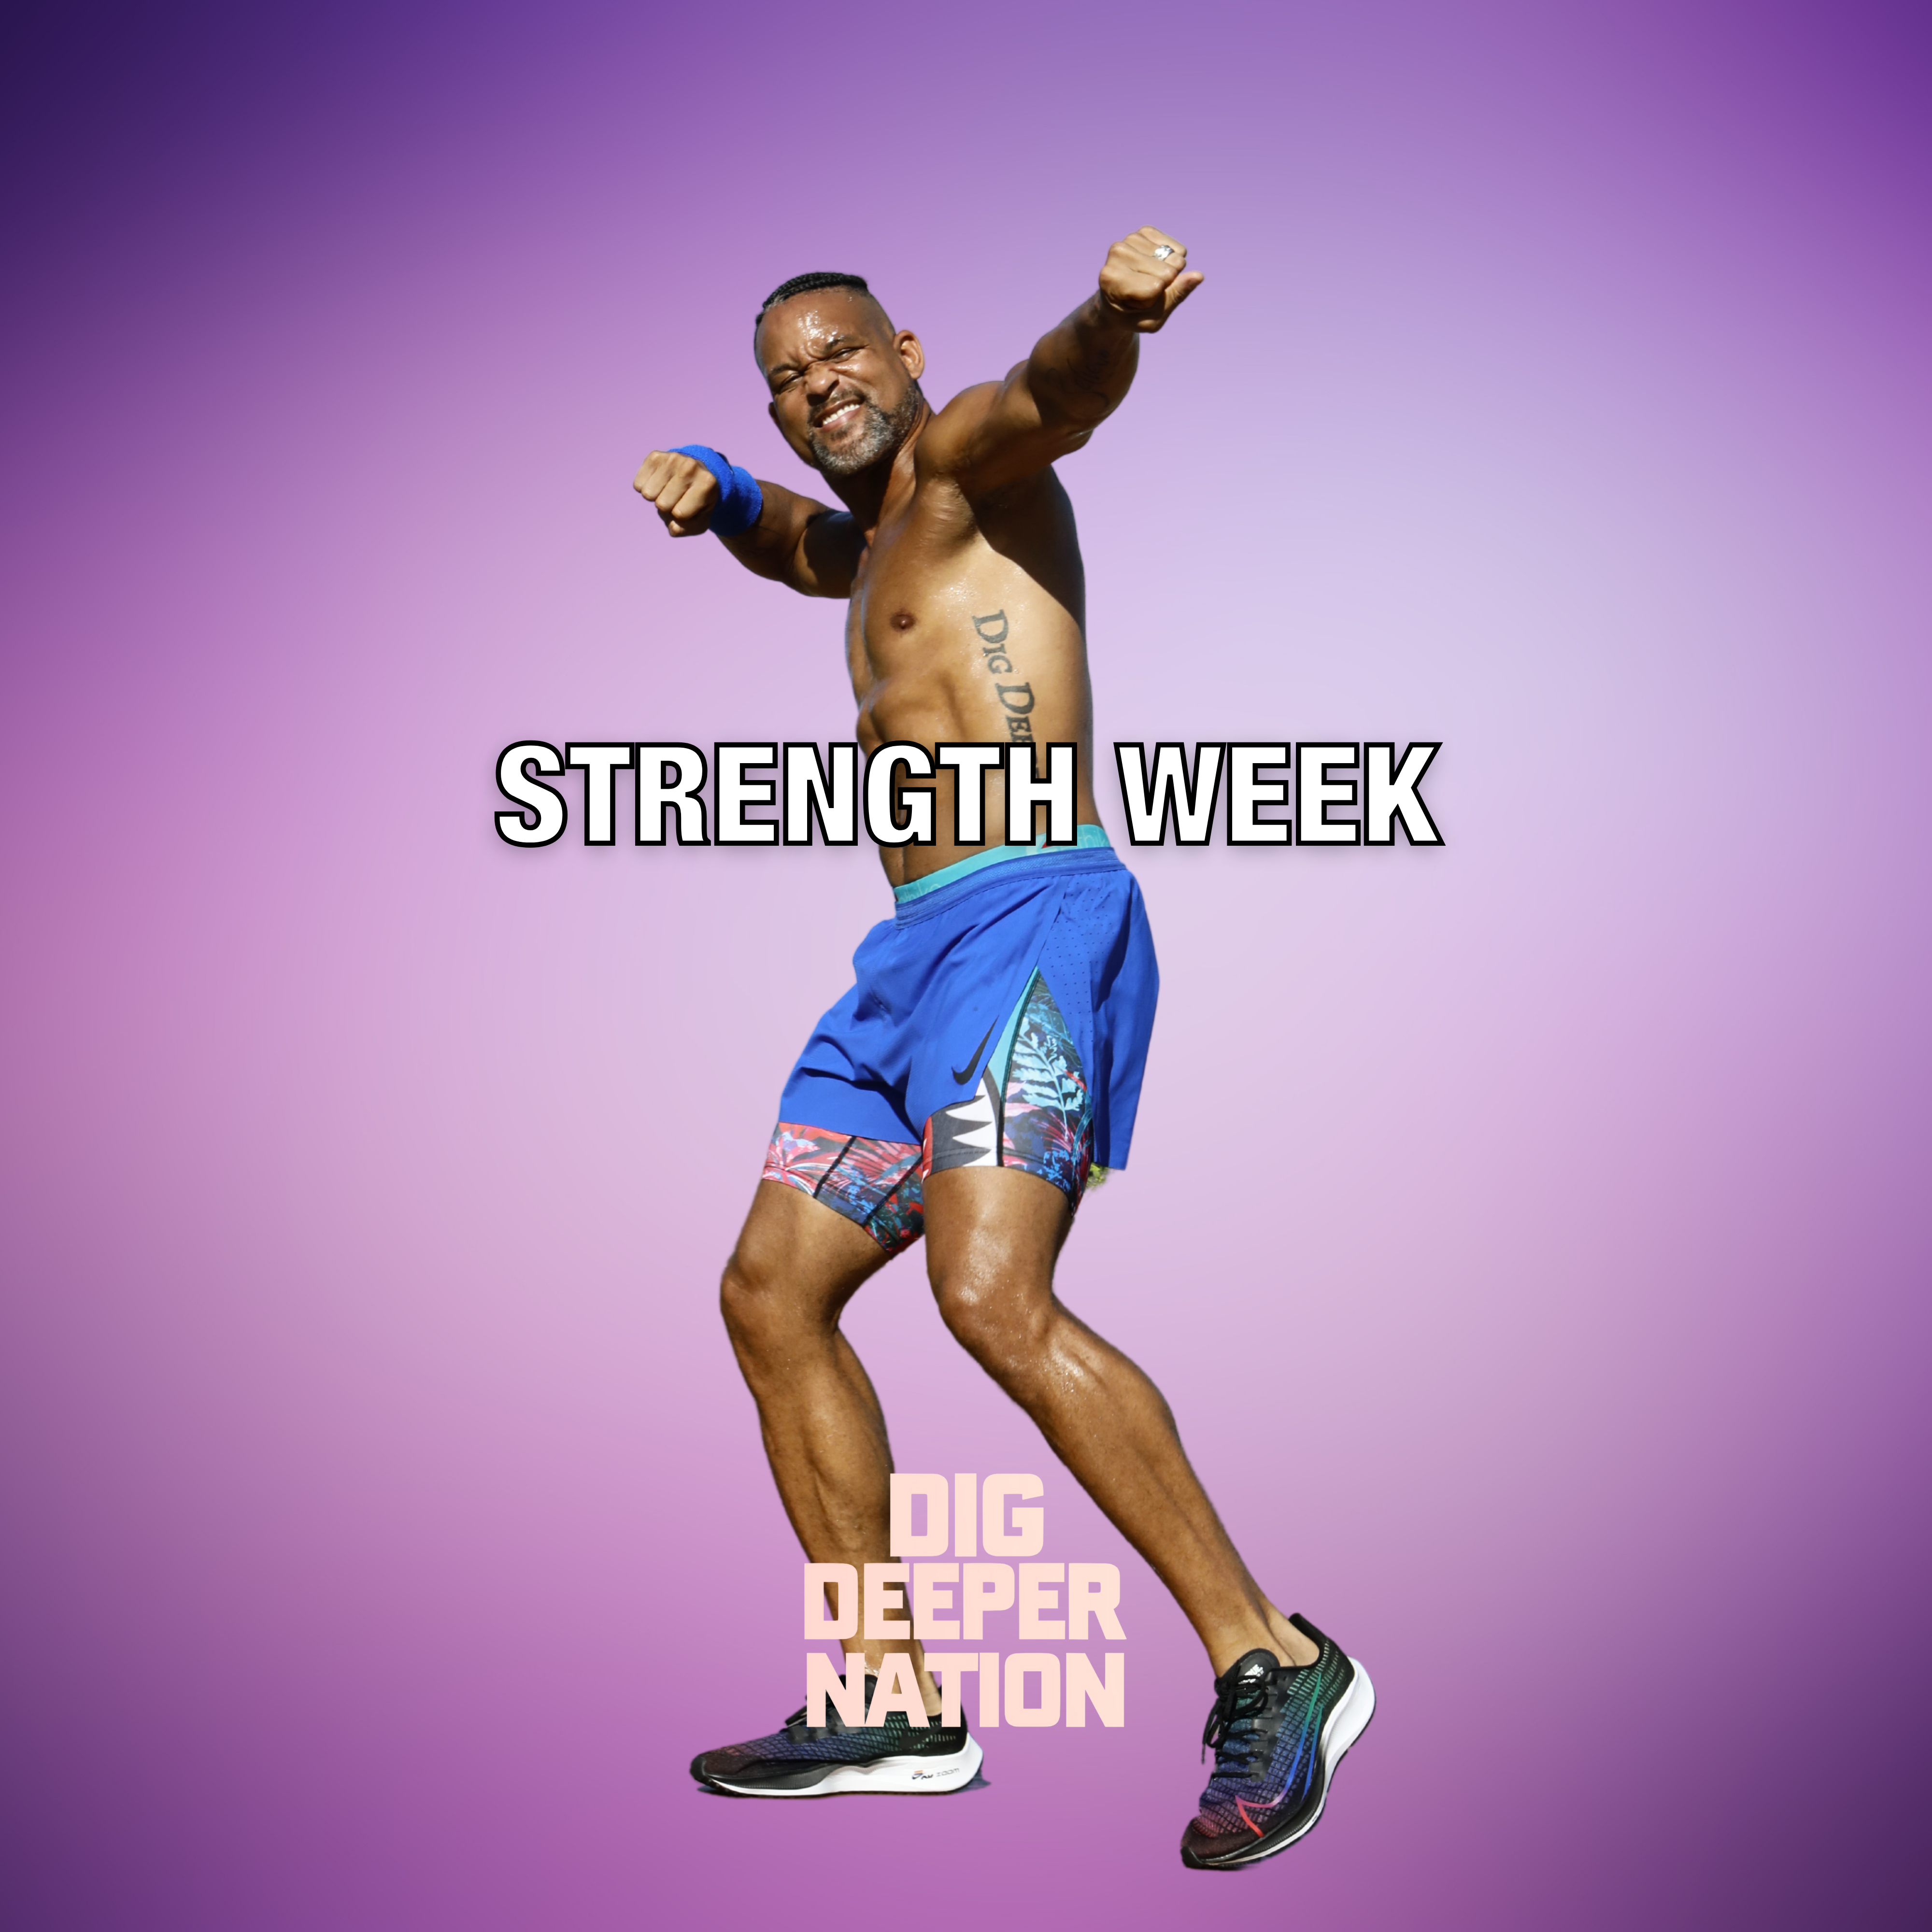 Purple background with Shaun T posing in foreground, text overlay that says Strength Week